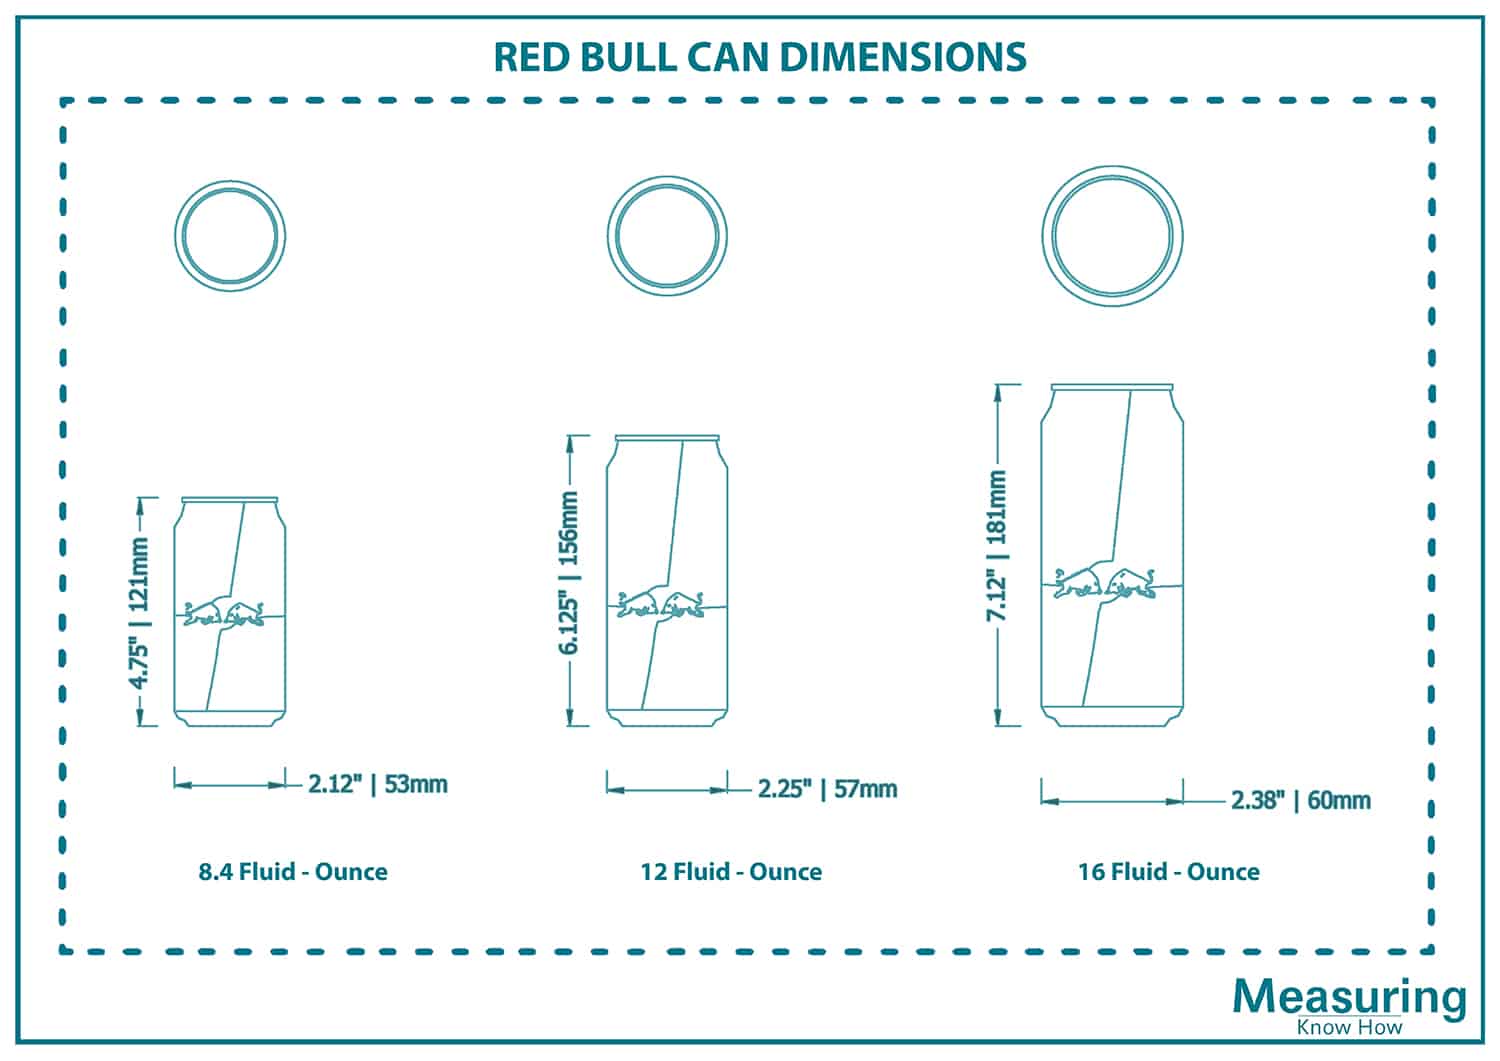 Red bull can dimensions